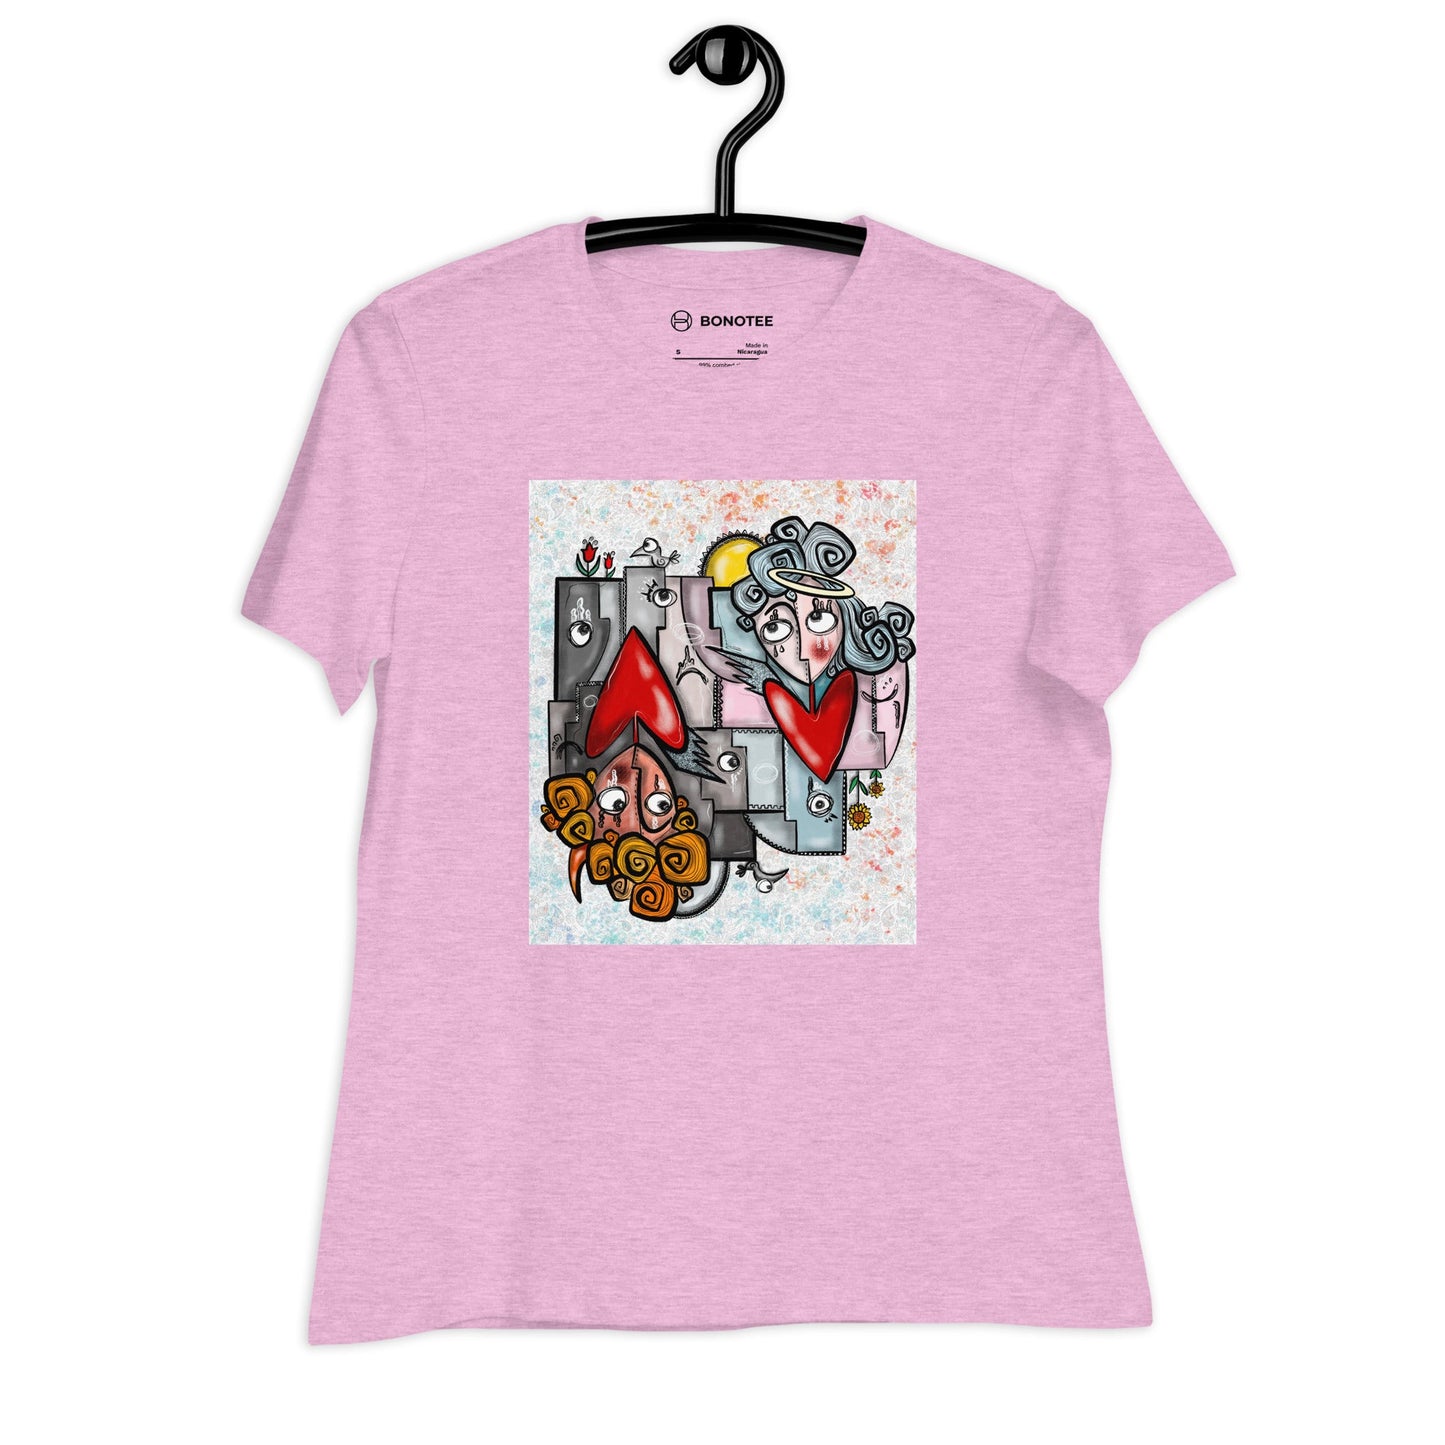 TWO FRIENDS Women's Relaxed T-Shirt - Bonotee